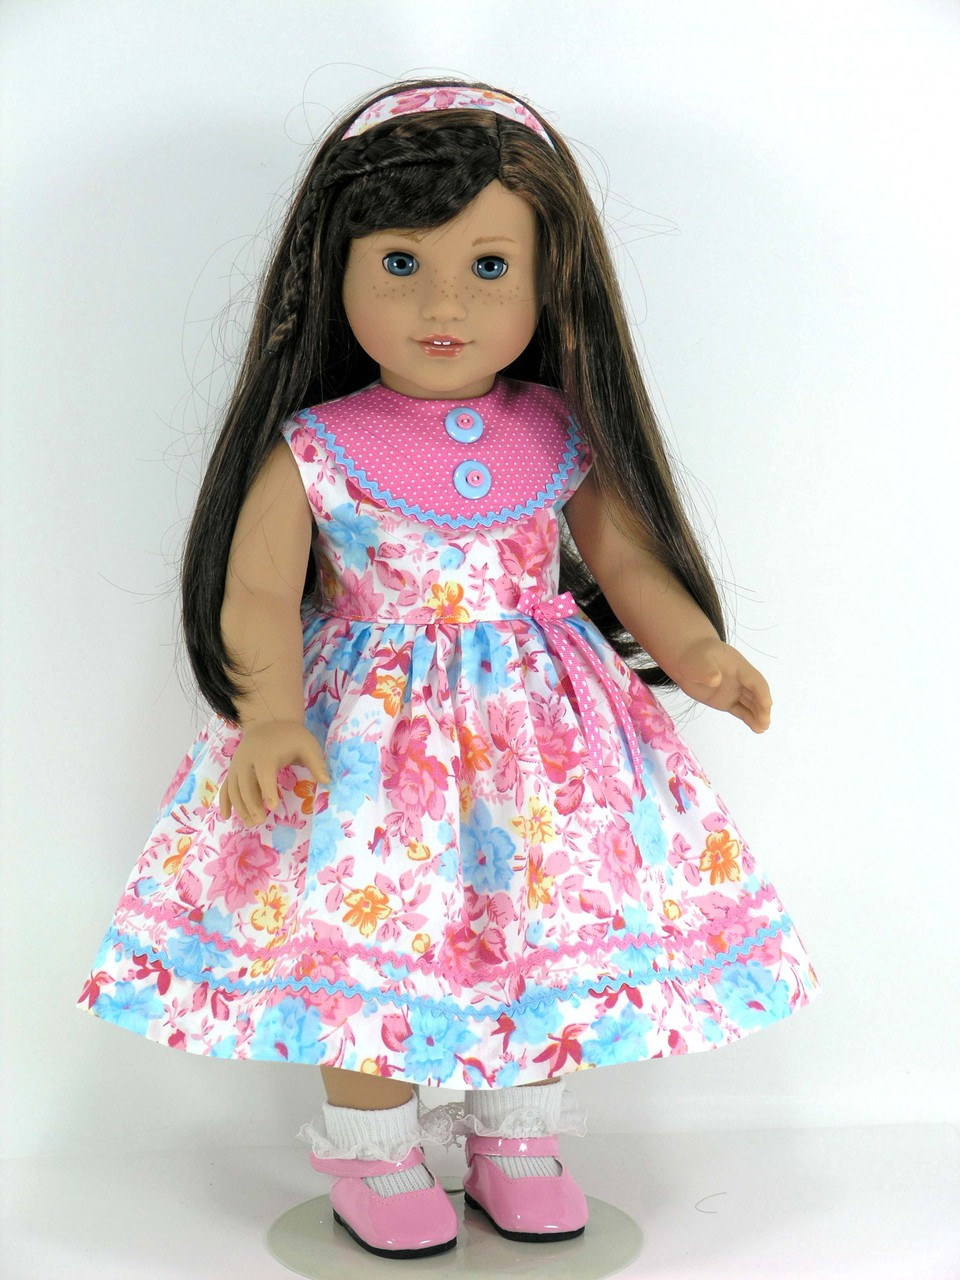 Handmade American Girl Clothes - Doll Dress - Dots, Pink, Blue Floral ...